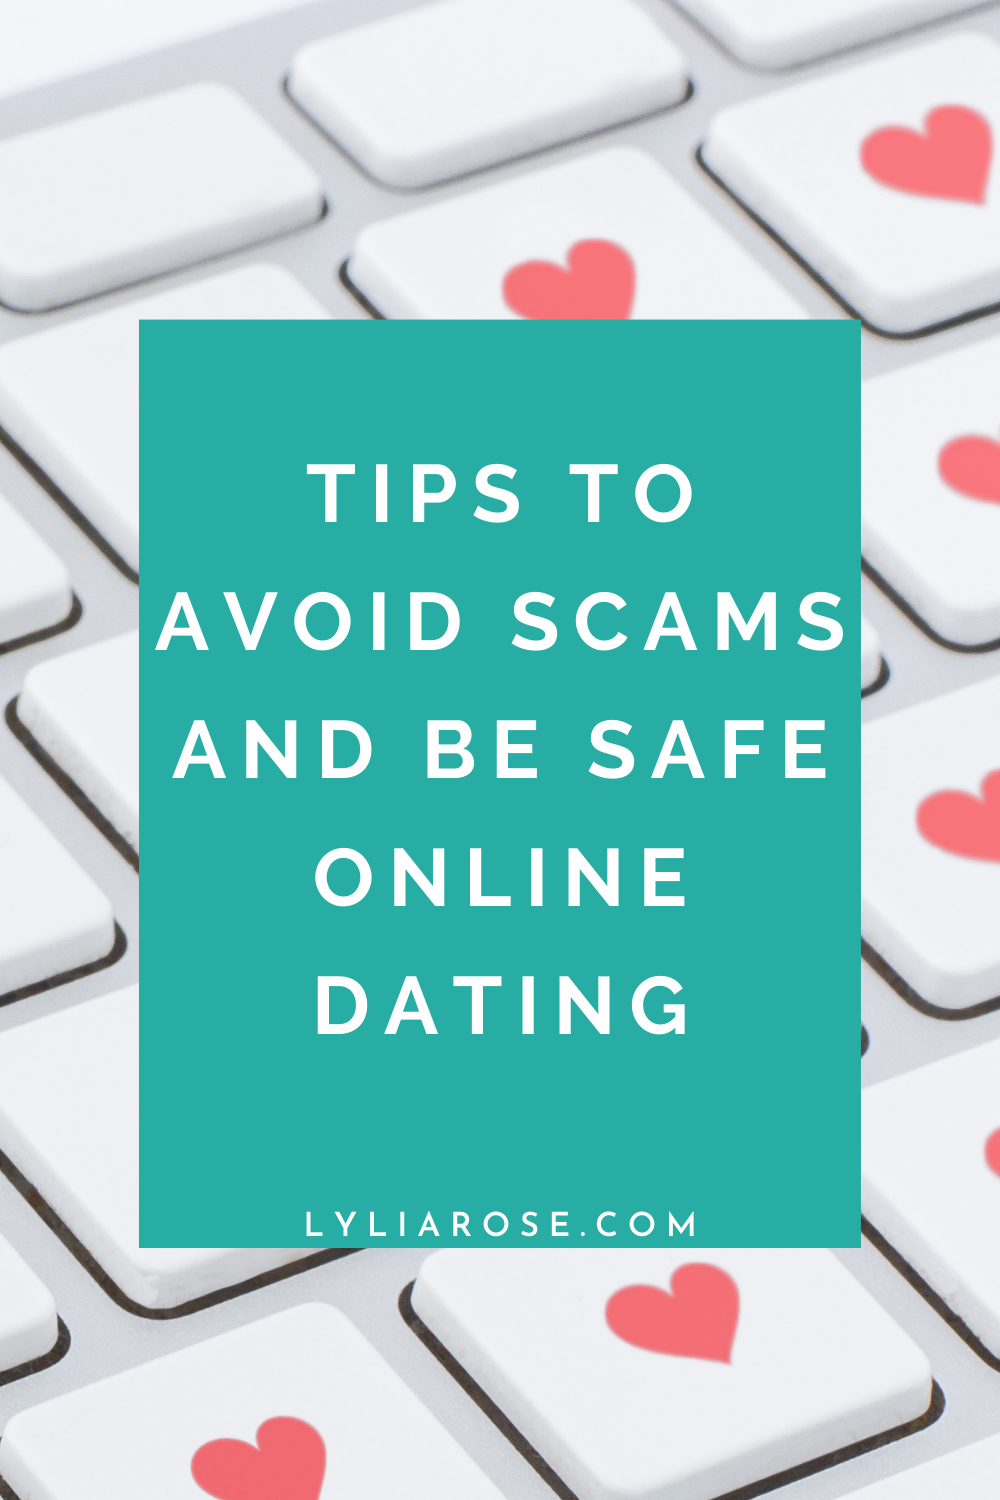 Tips to avoid scams and be safe online dating